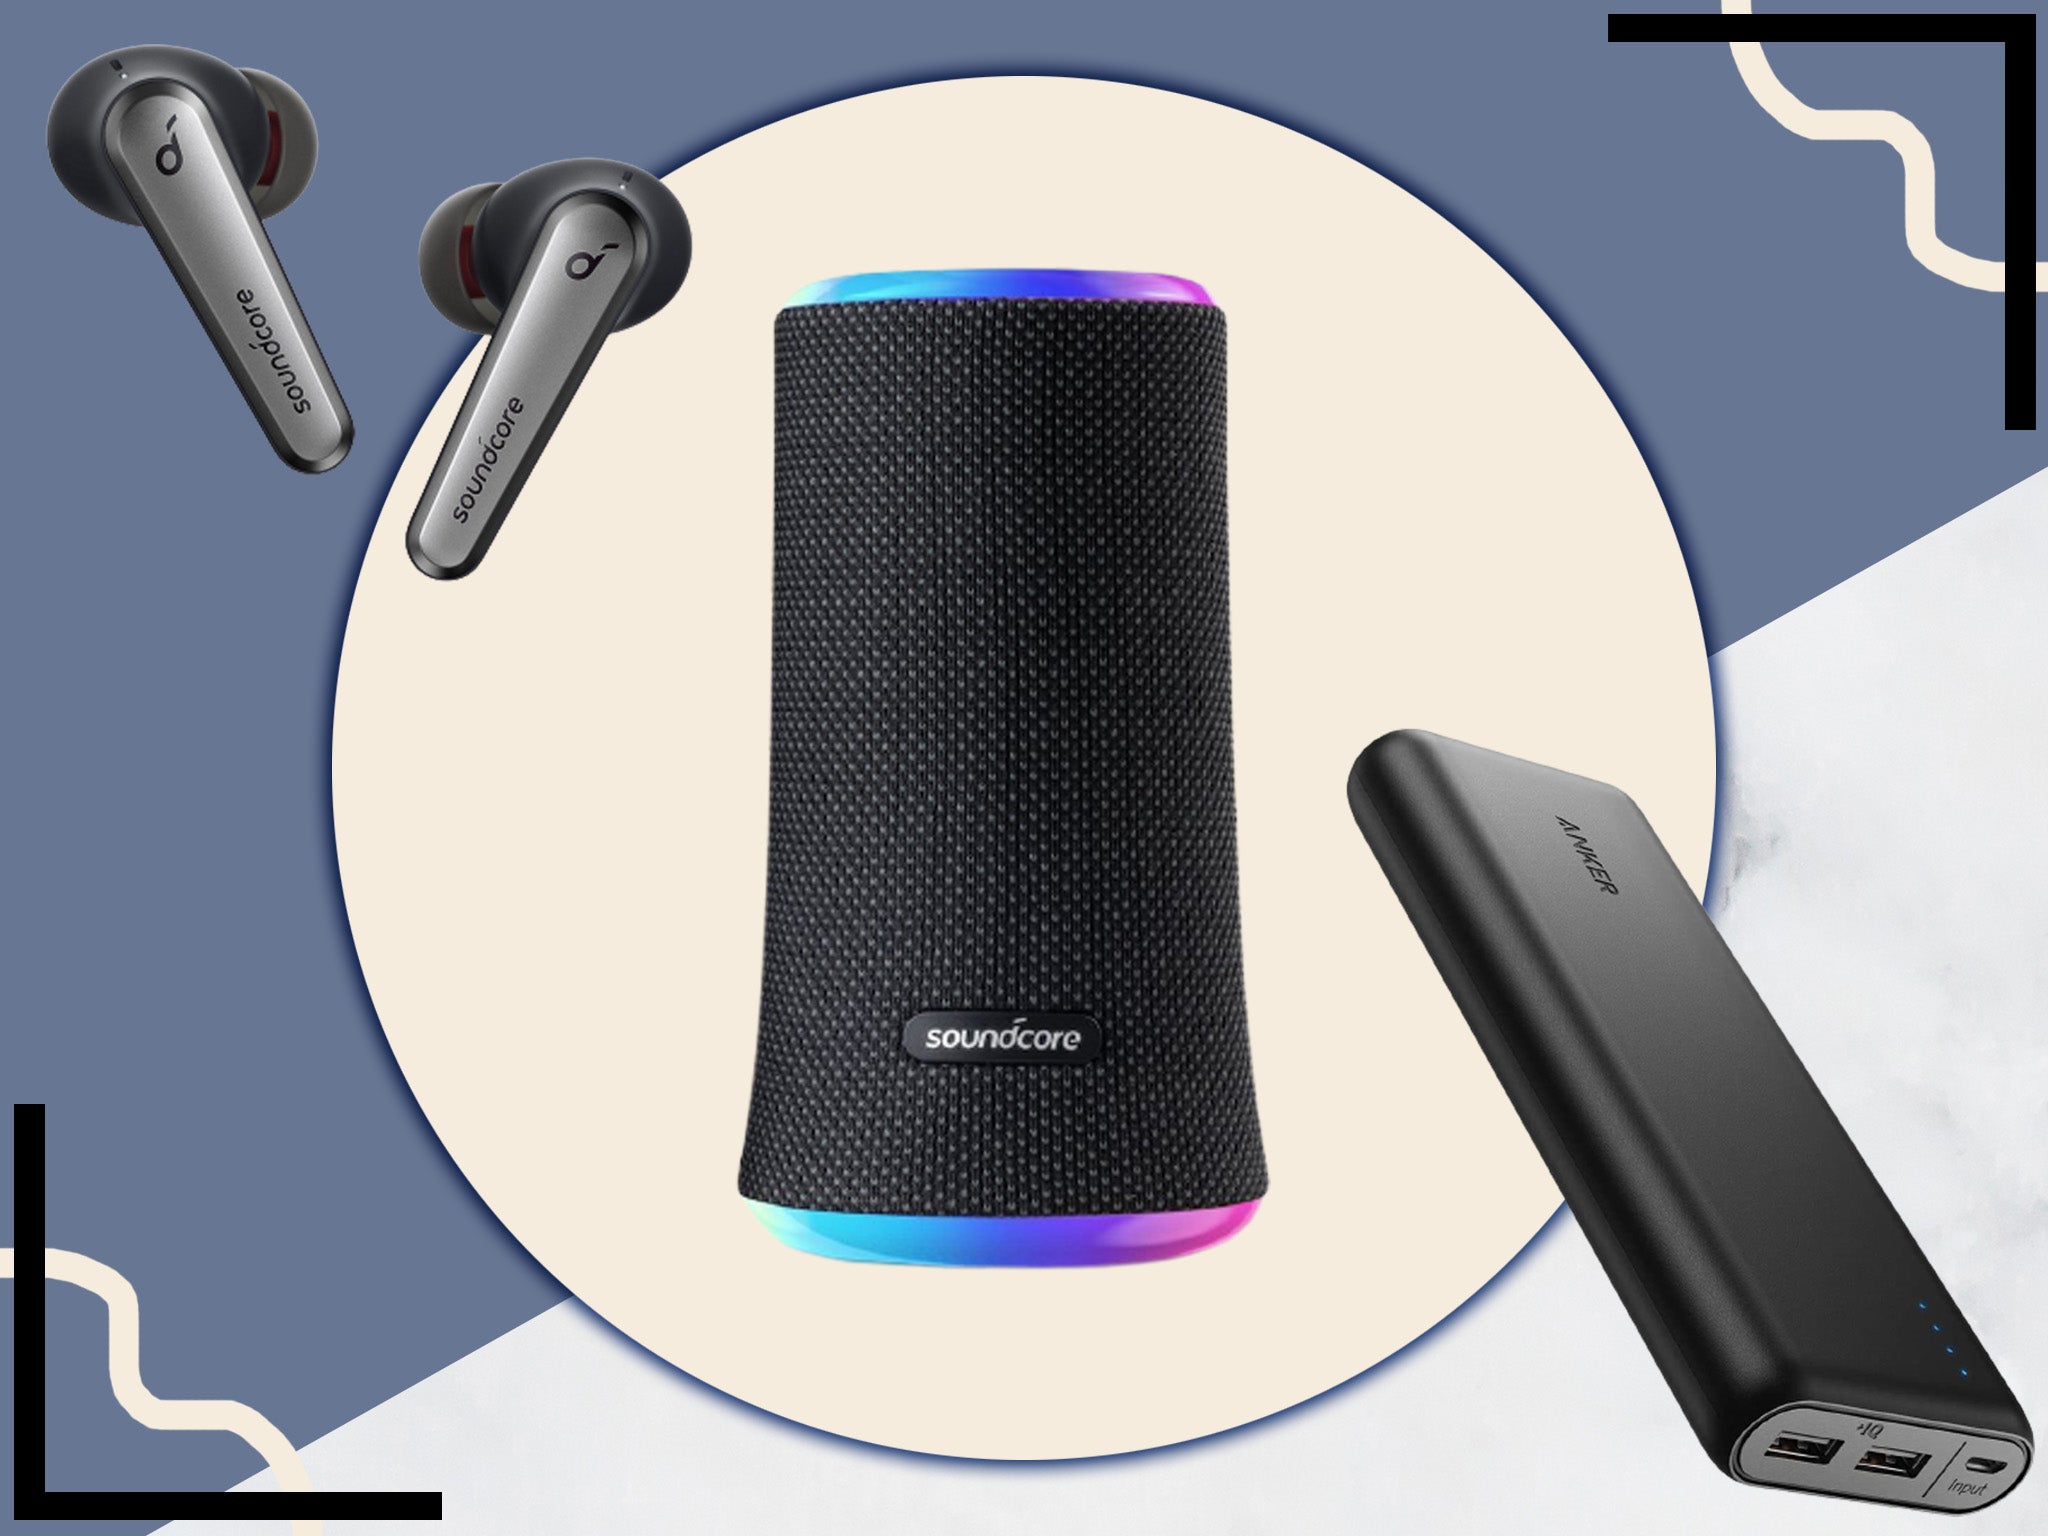 With a 500-strong product line-up, here’s how to find the right gadget for you